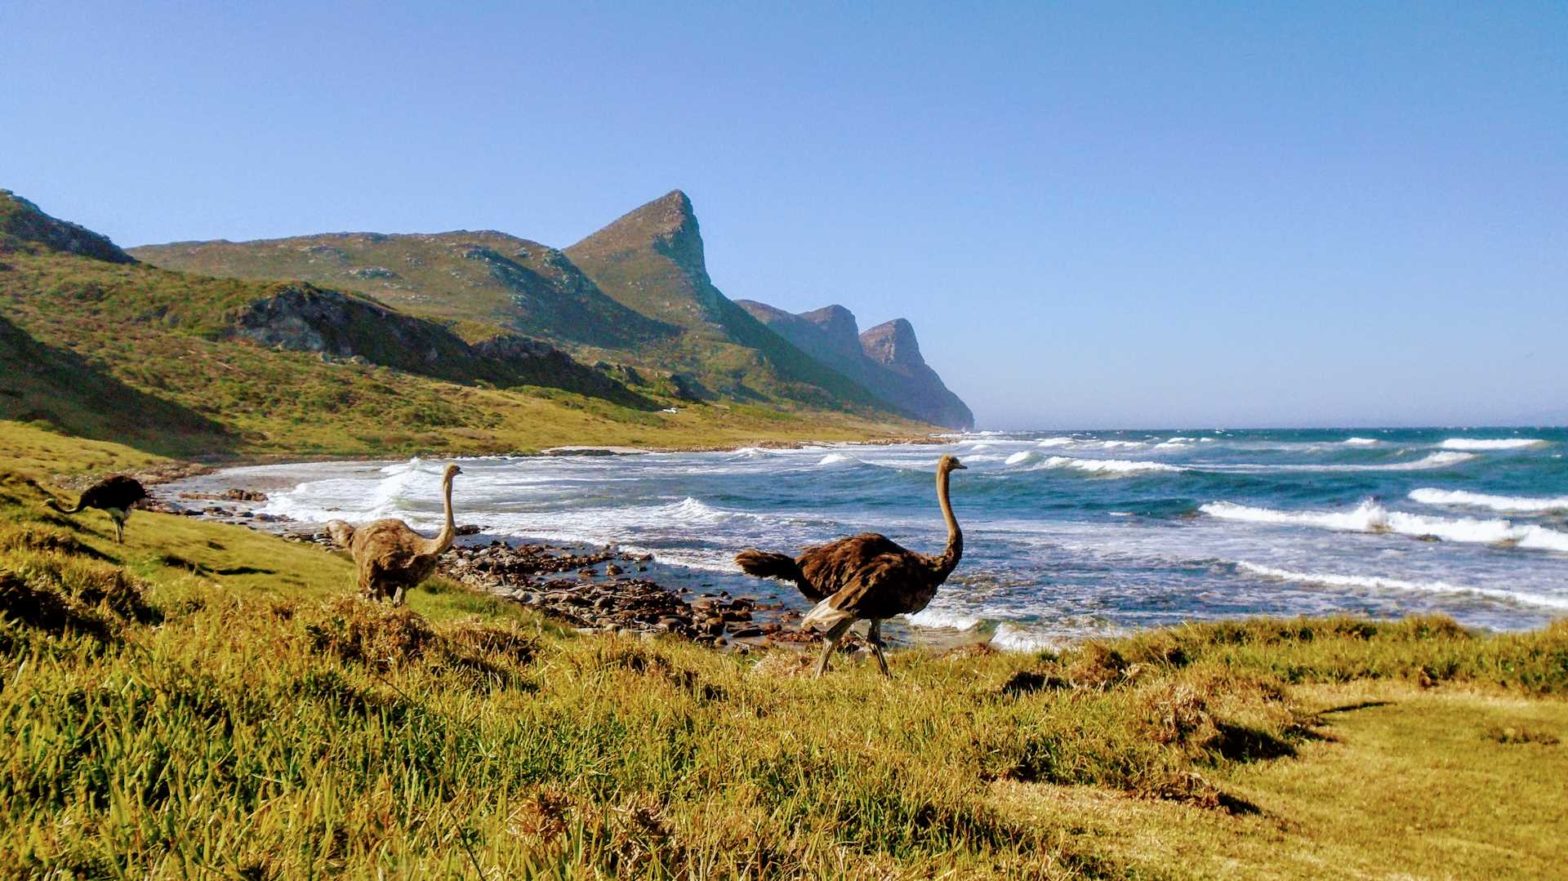 Ostriches on the beach in Cape Point National Park, South Africa, inspiration for the Ostrich Trails logo.